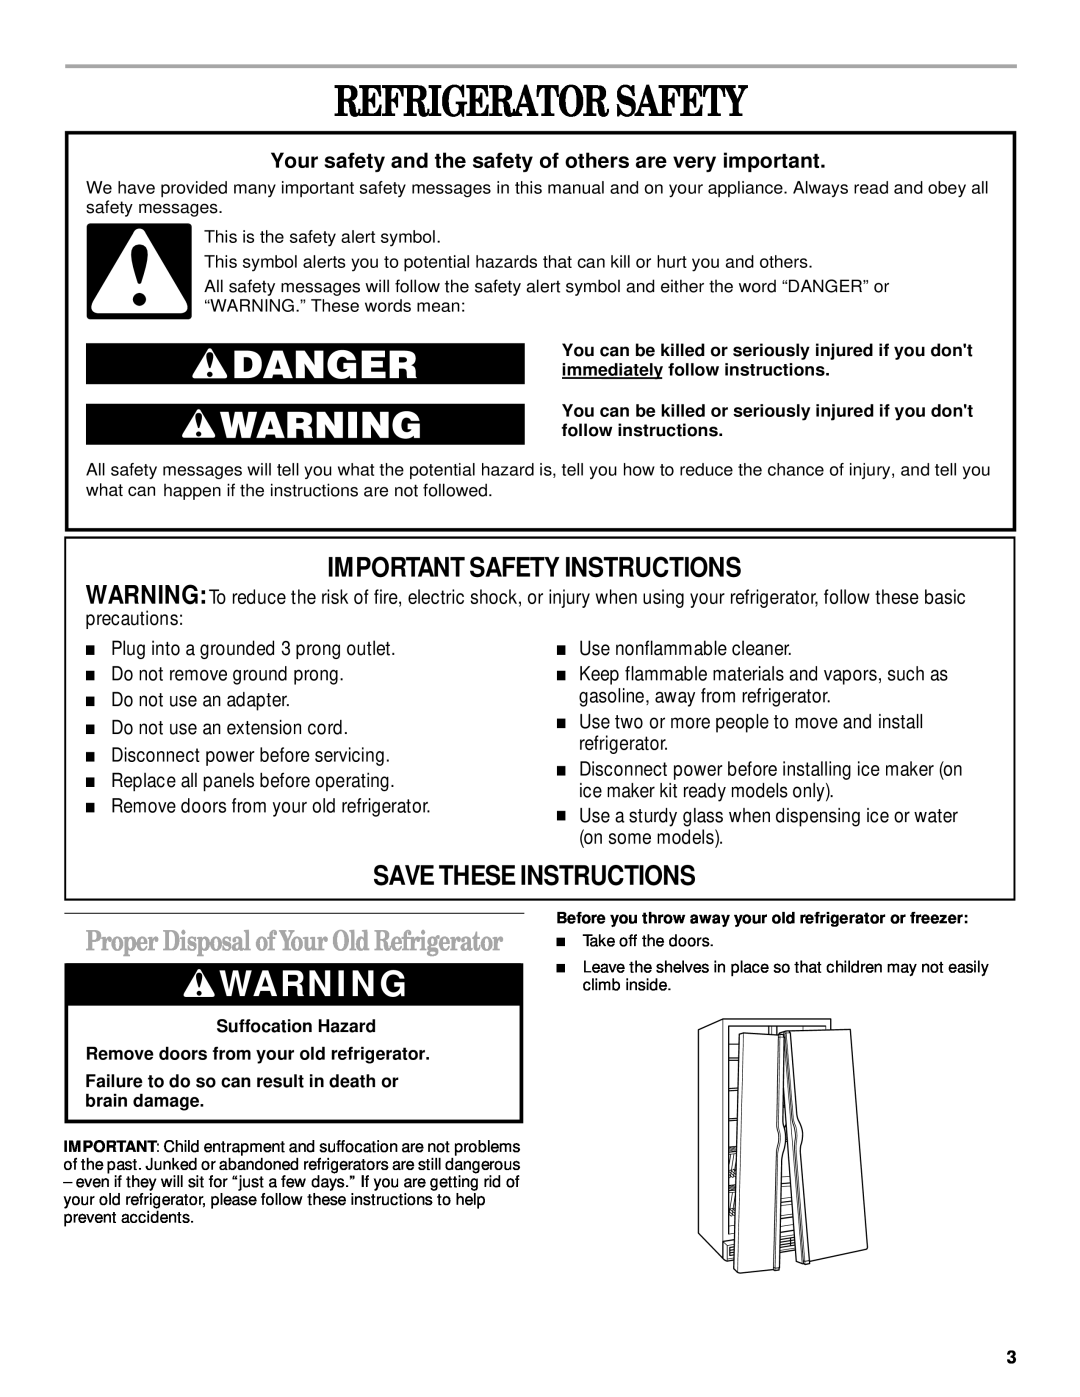 Whirlpool ED22RFXFW03 manual Refrigerator Safety, Proper Disposal of Your Old Refrigerator, Important Safety Instructions 